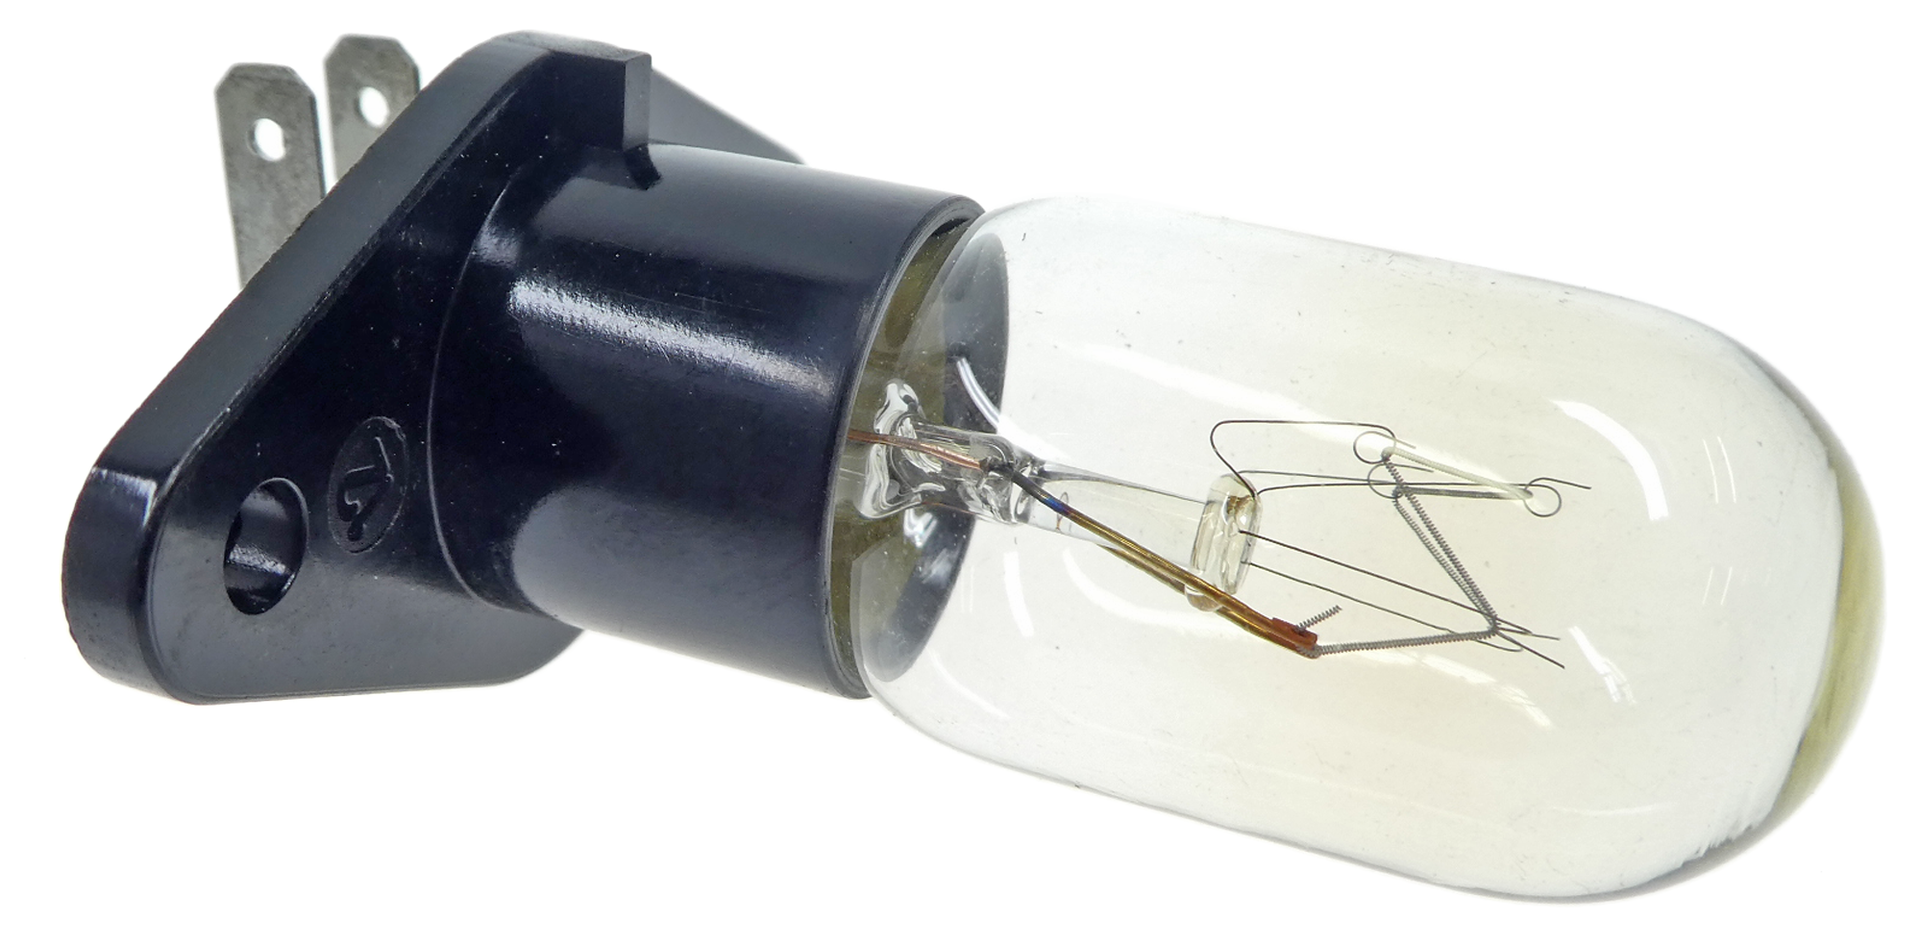 Samsung Microwave Oven Lamp Bulb 4713-001046 T170 20w for sale online 